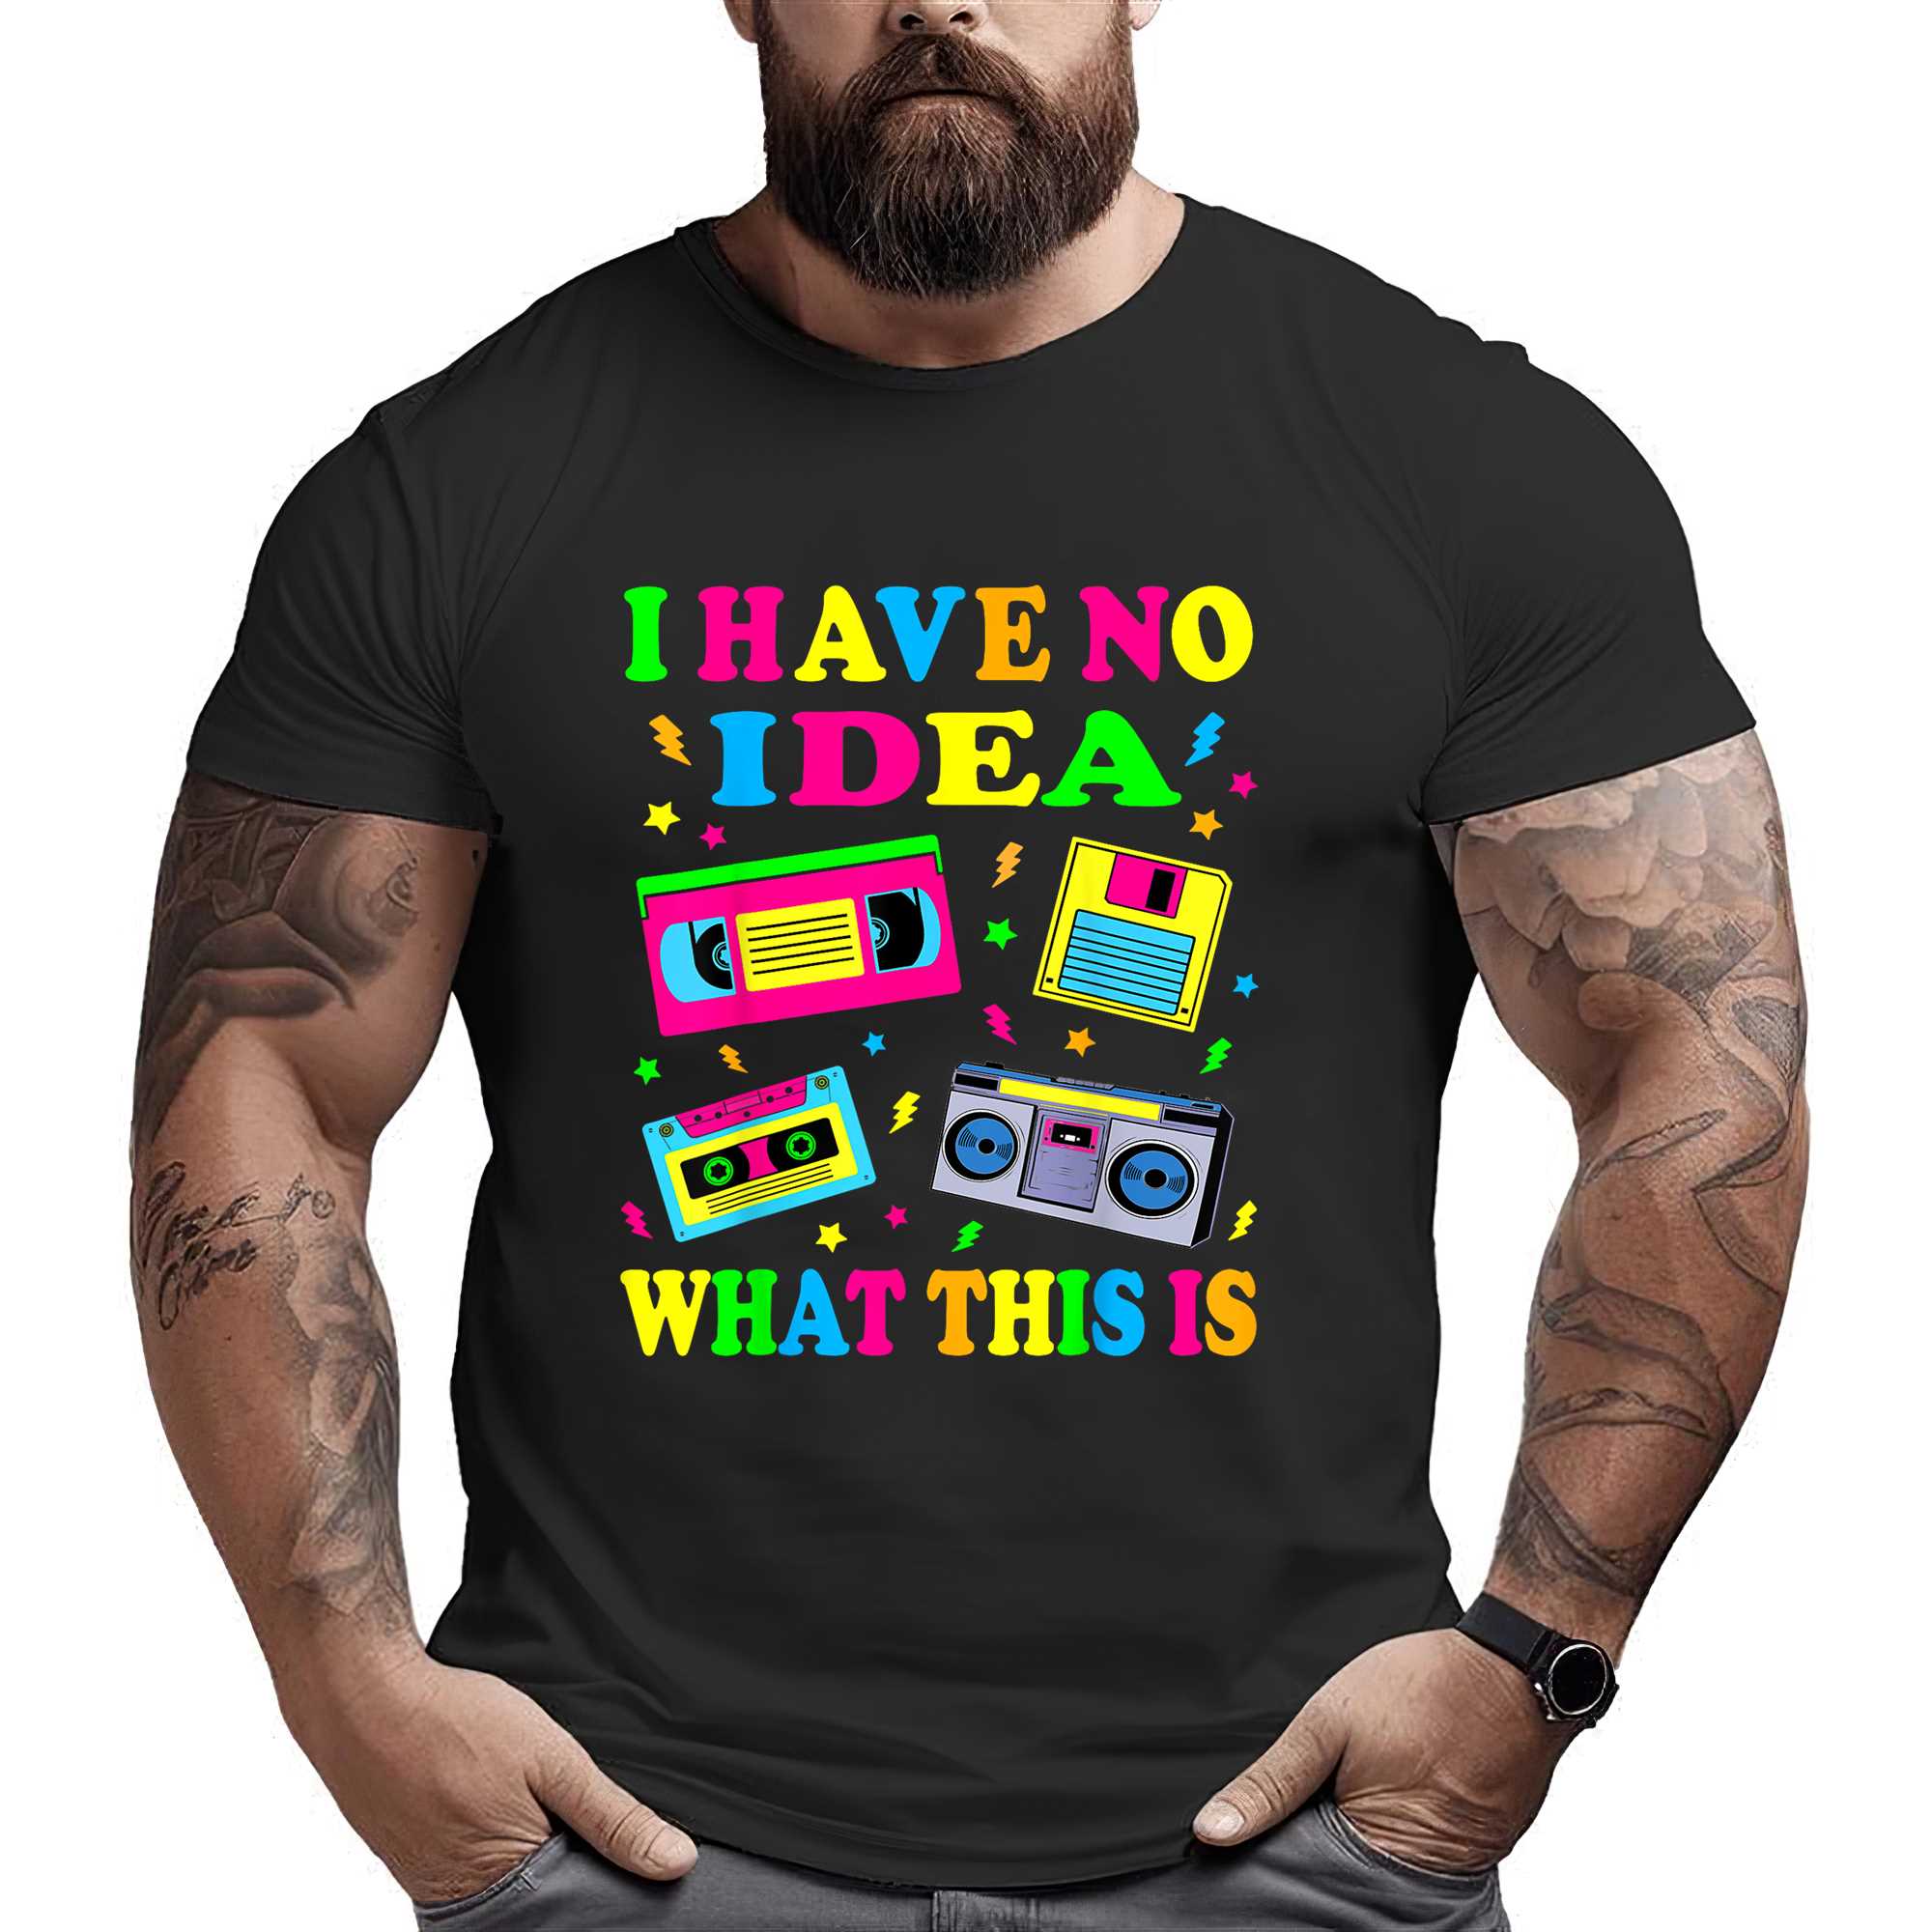 I Have No Idea What This Is Men Women Kid 70s 80s 90s Outfit T-shirt